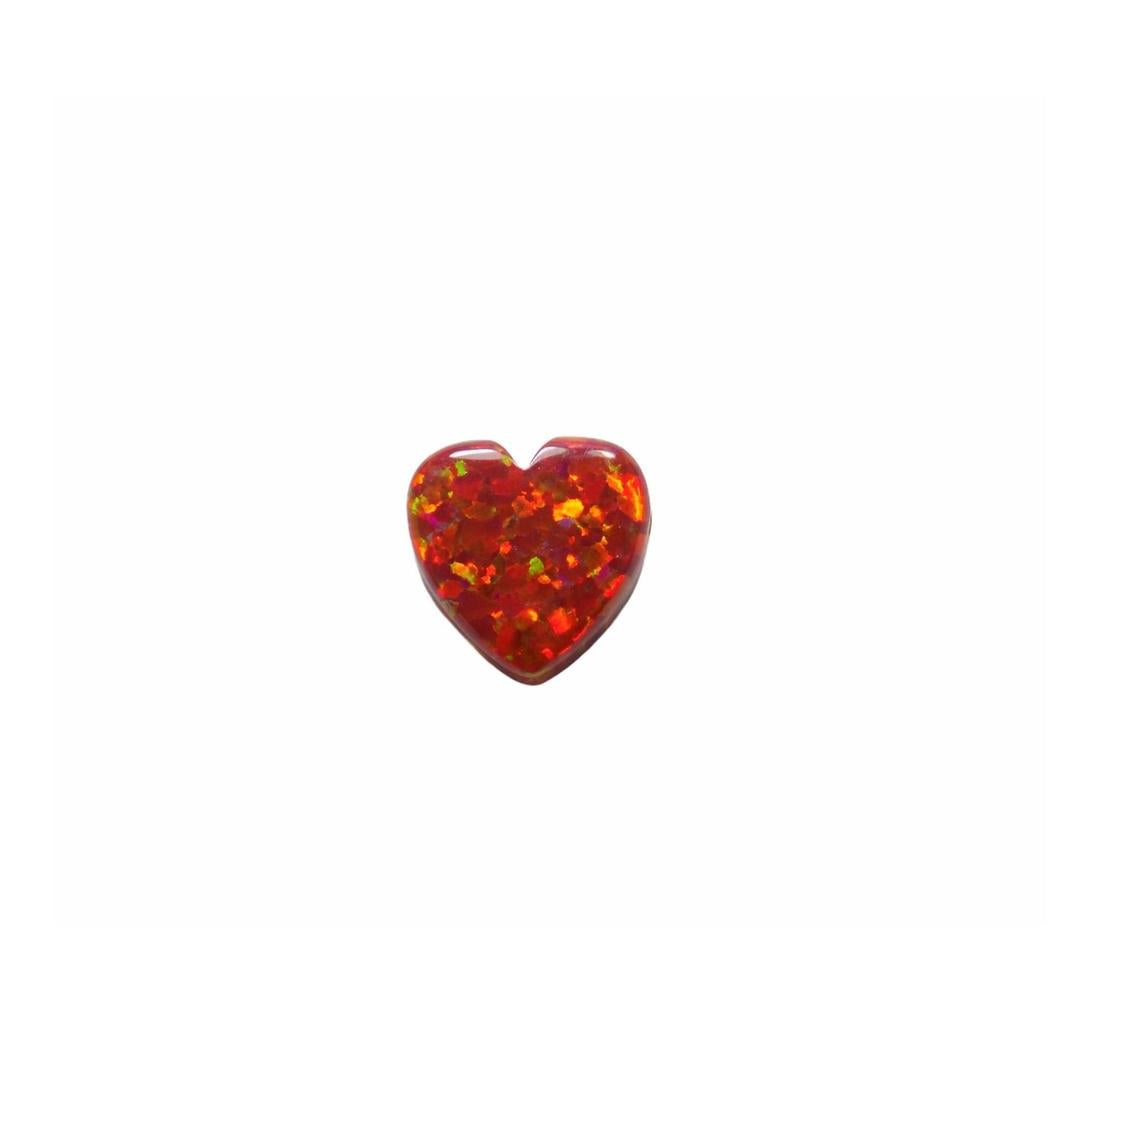 Lab created opal heart red cabochon